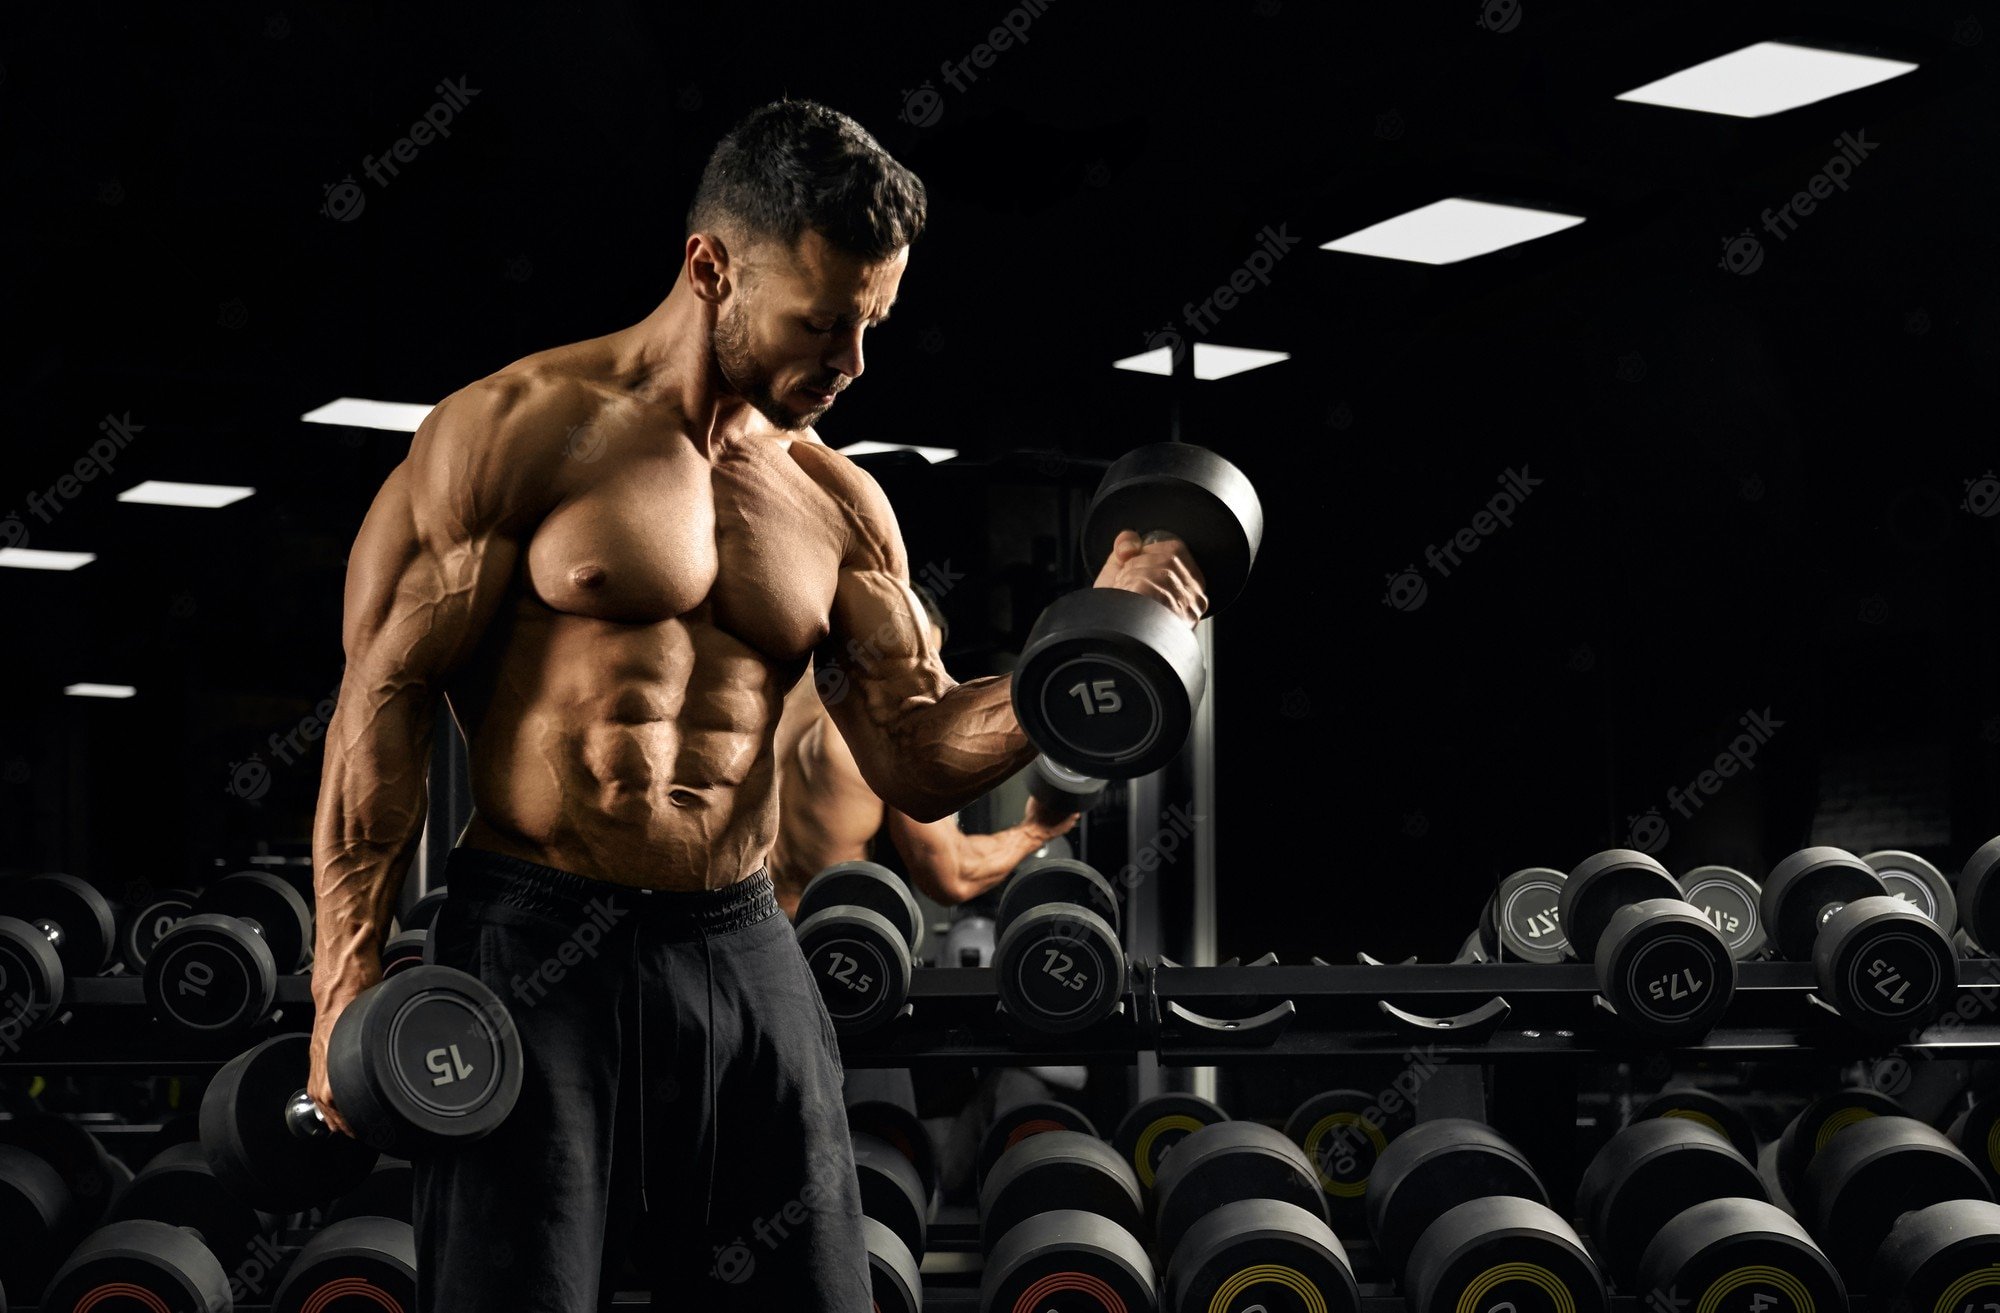 Premium Photo. Front view of shirtless bodybuilder training biceps with weights near stand with dumbbells